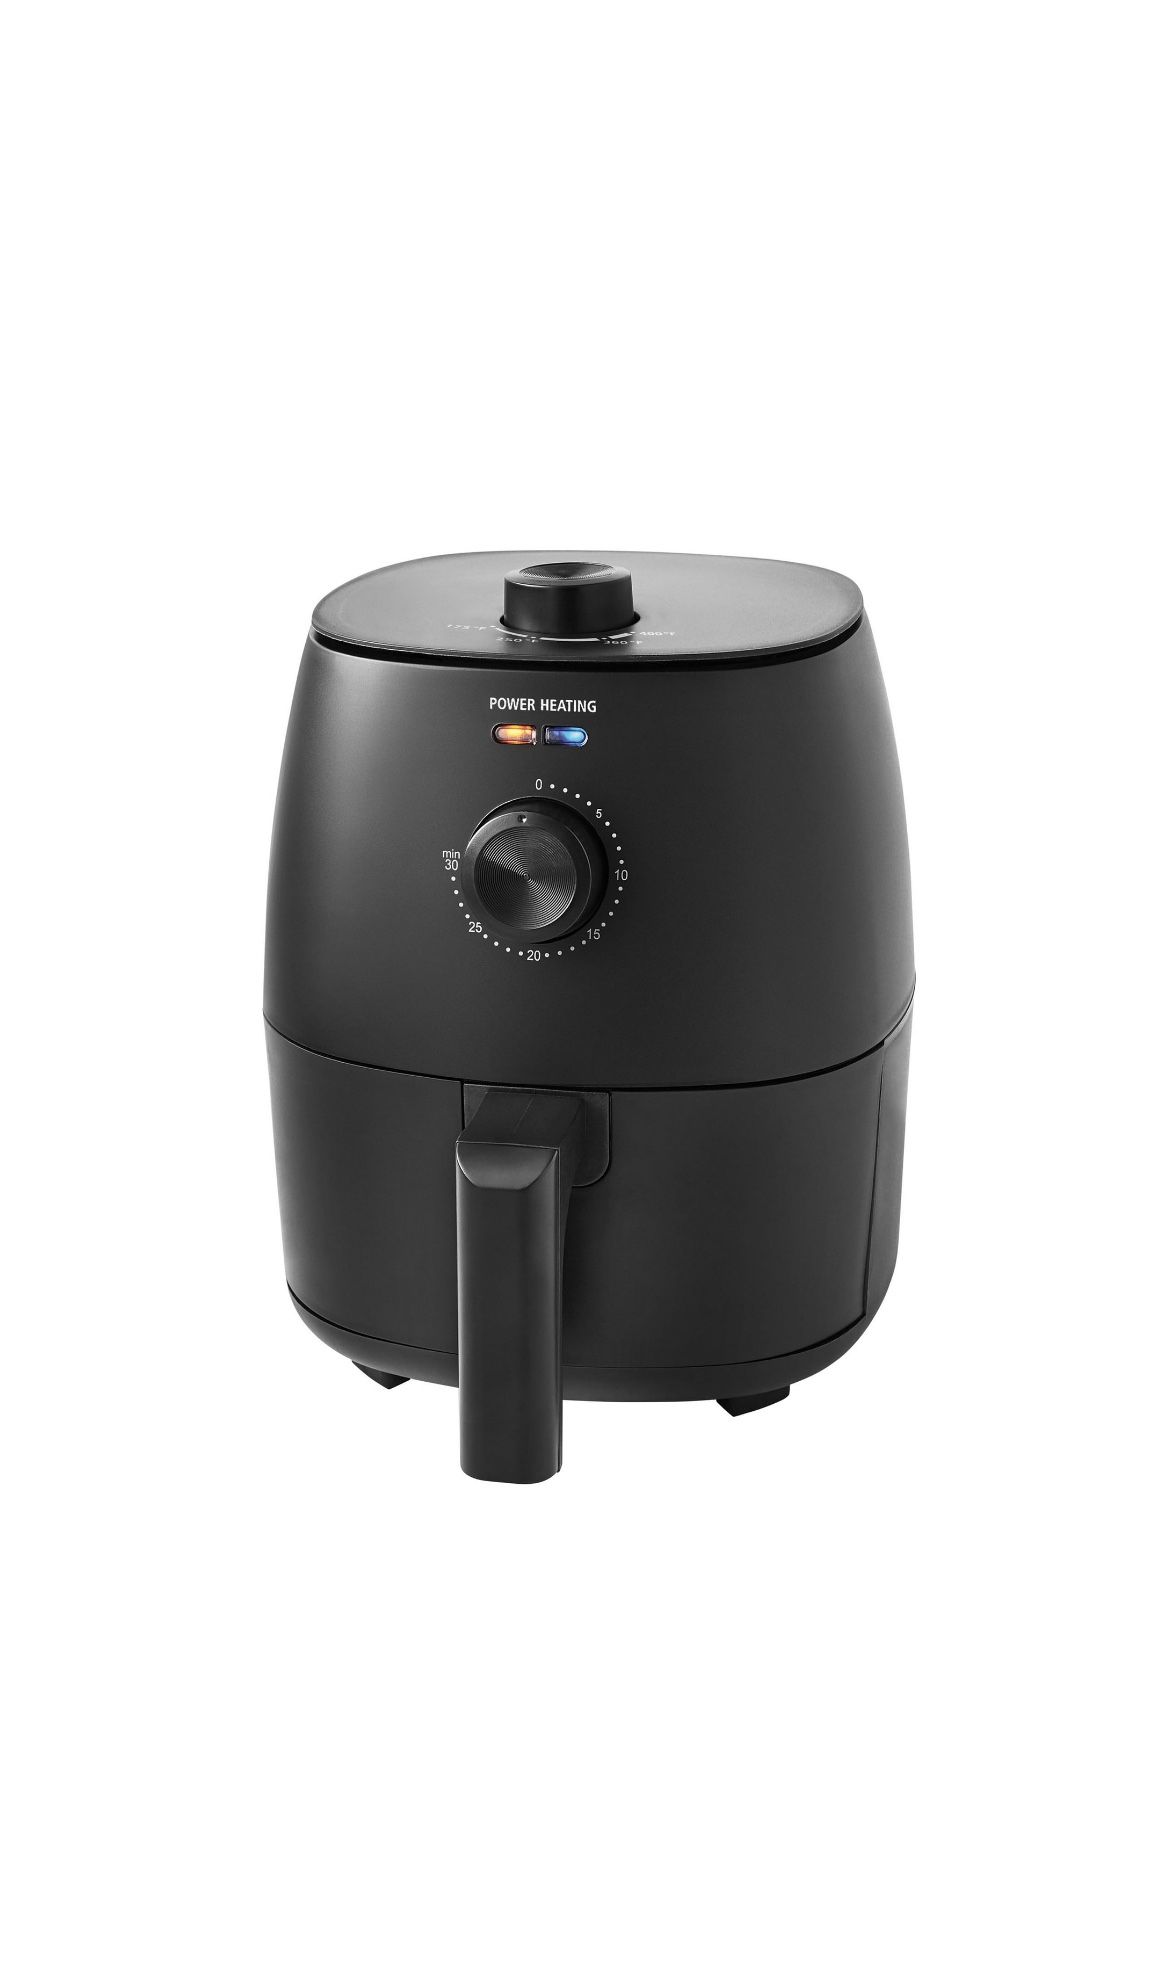 Bella pro series coffee maker and analog air fryer